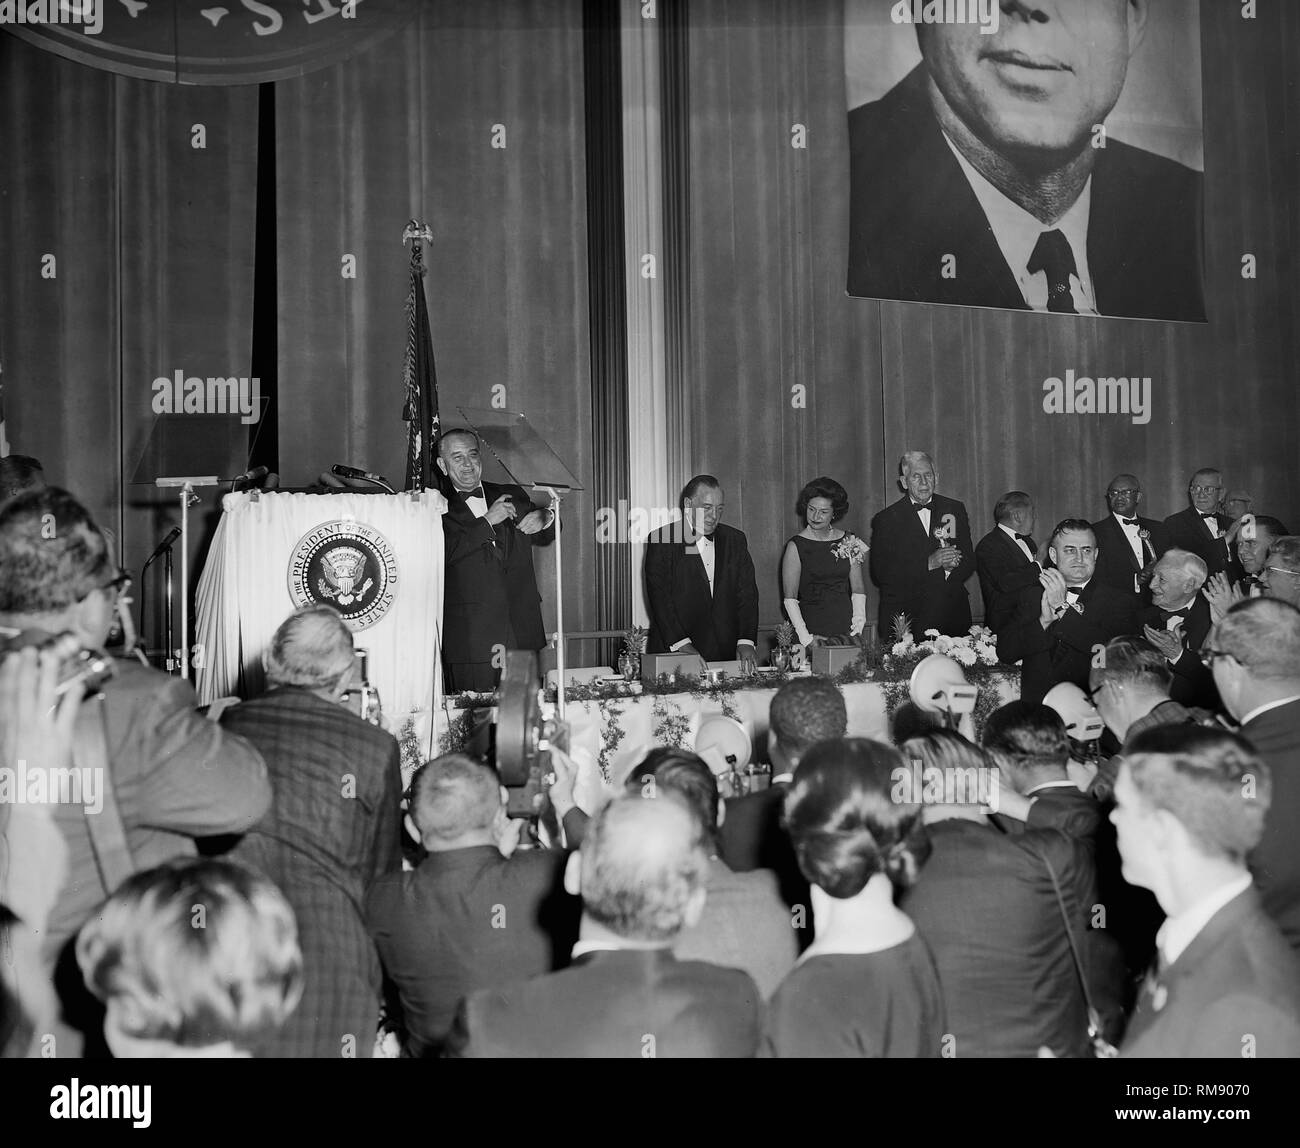 President Lyndon Johnson is applauded after a speech in Chicago under a large portrait of JFK, ca. 1964. Stock Photo